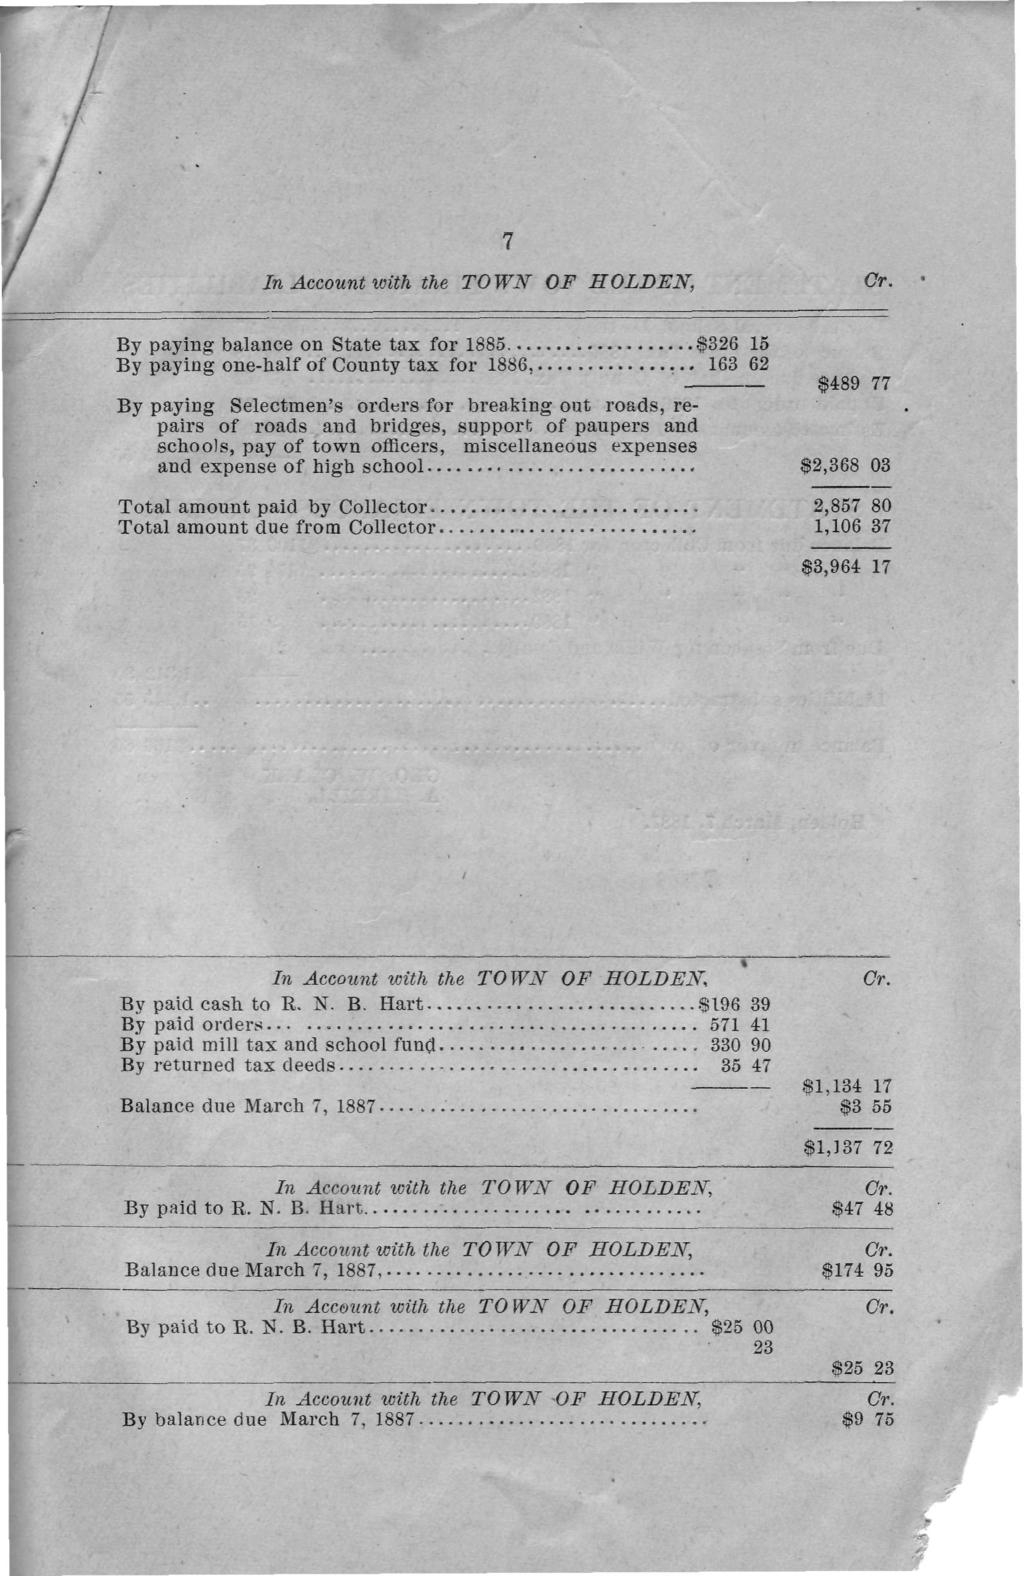 7 In Account with the TOWN OF HOLDEN, By paying balance on State tax for 1885 $326 15 By paying one-half of County tax for 1886 163 62 $489 77 By paying Selectmen's orders for breaking out roads,